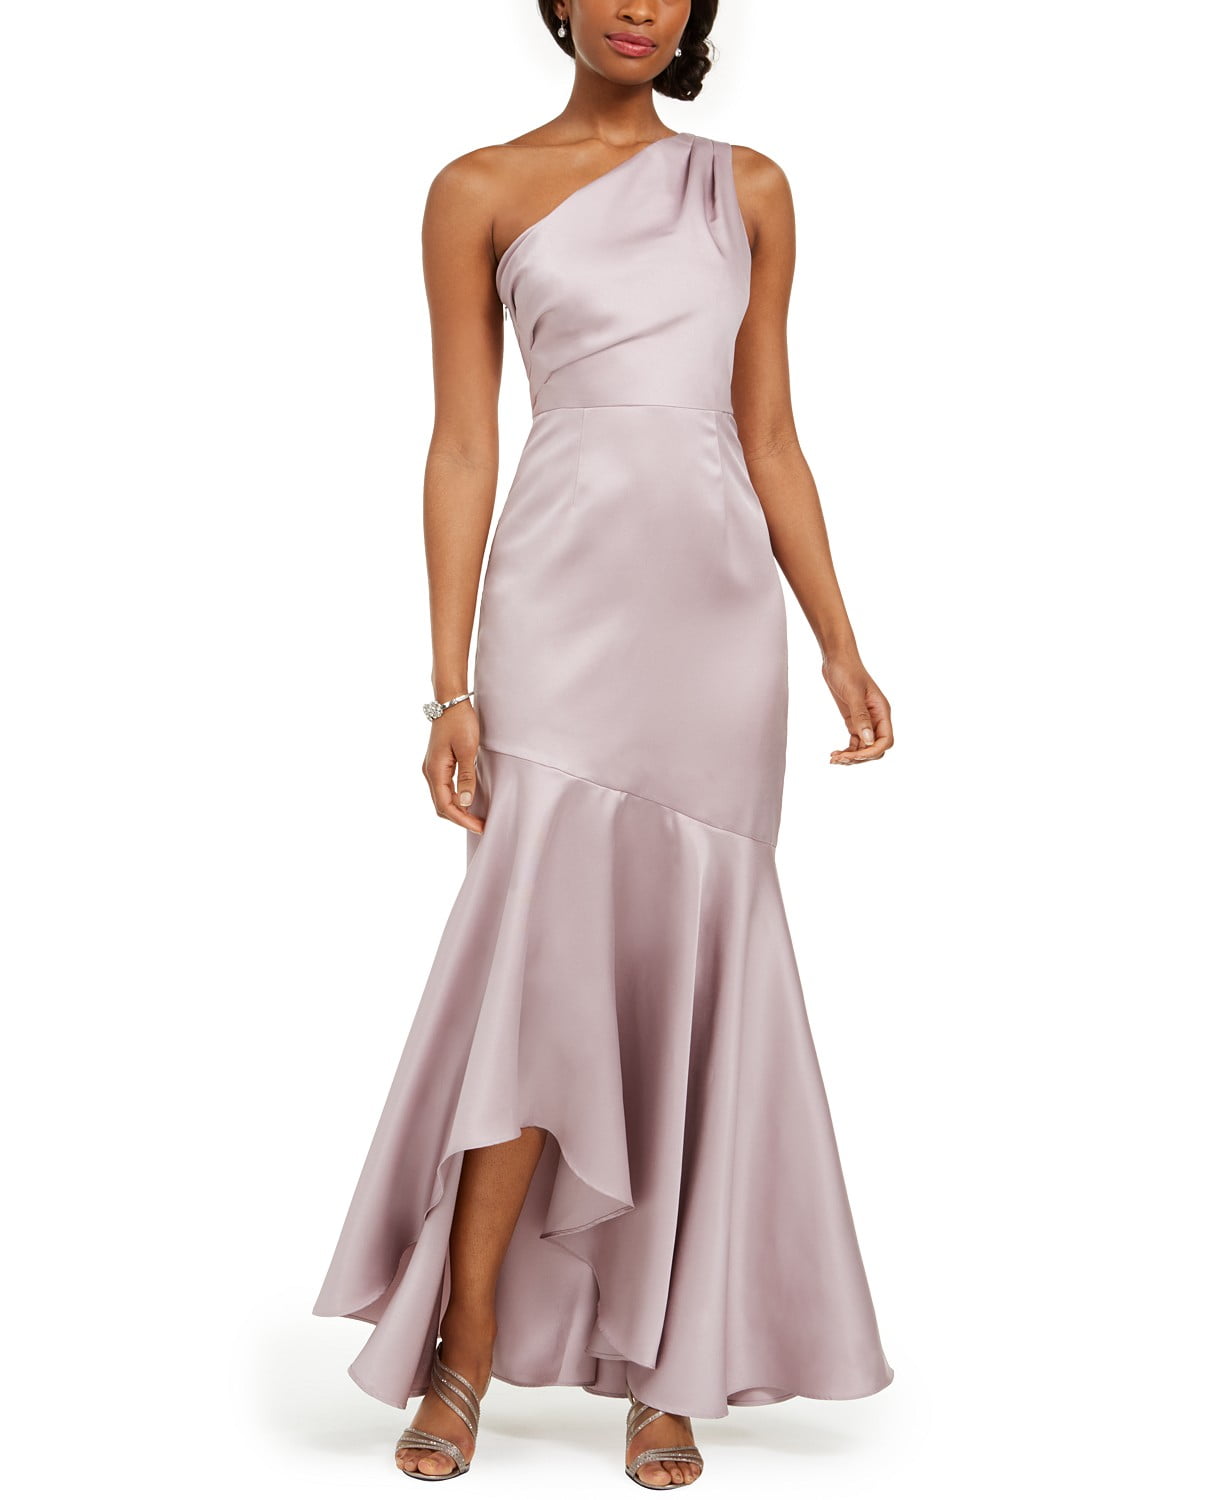 woocommerce-673321-2209615.cloudwaysapps.com-adrianna-papell-womens-one-shoulder-ruffled-mermaid-gown-dress